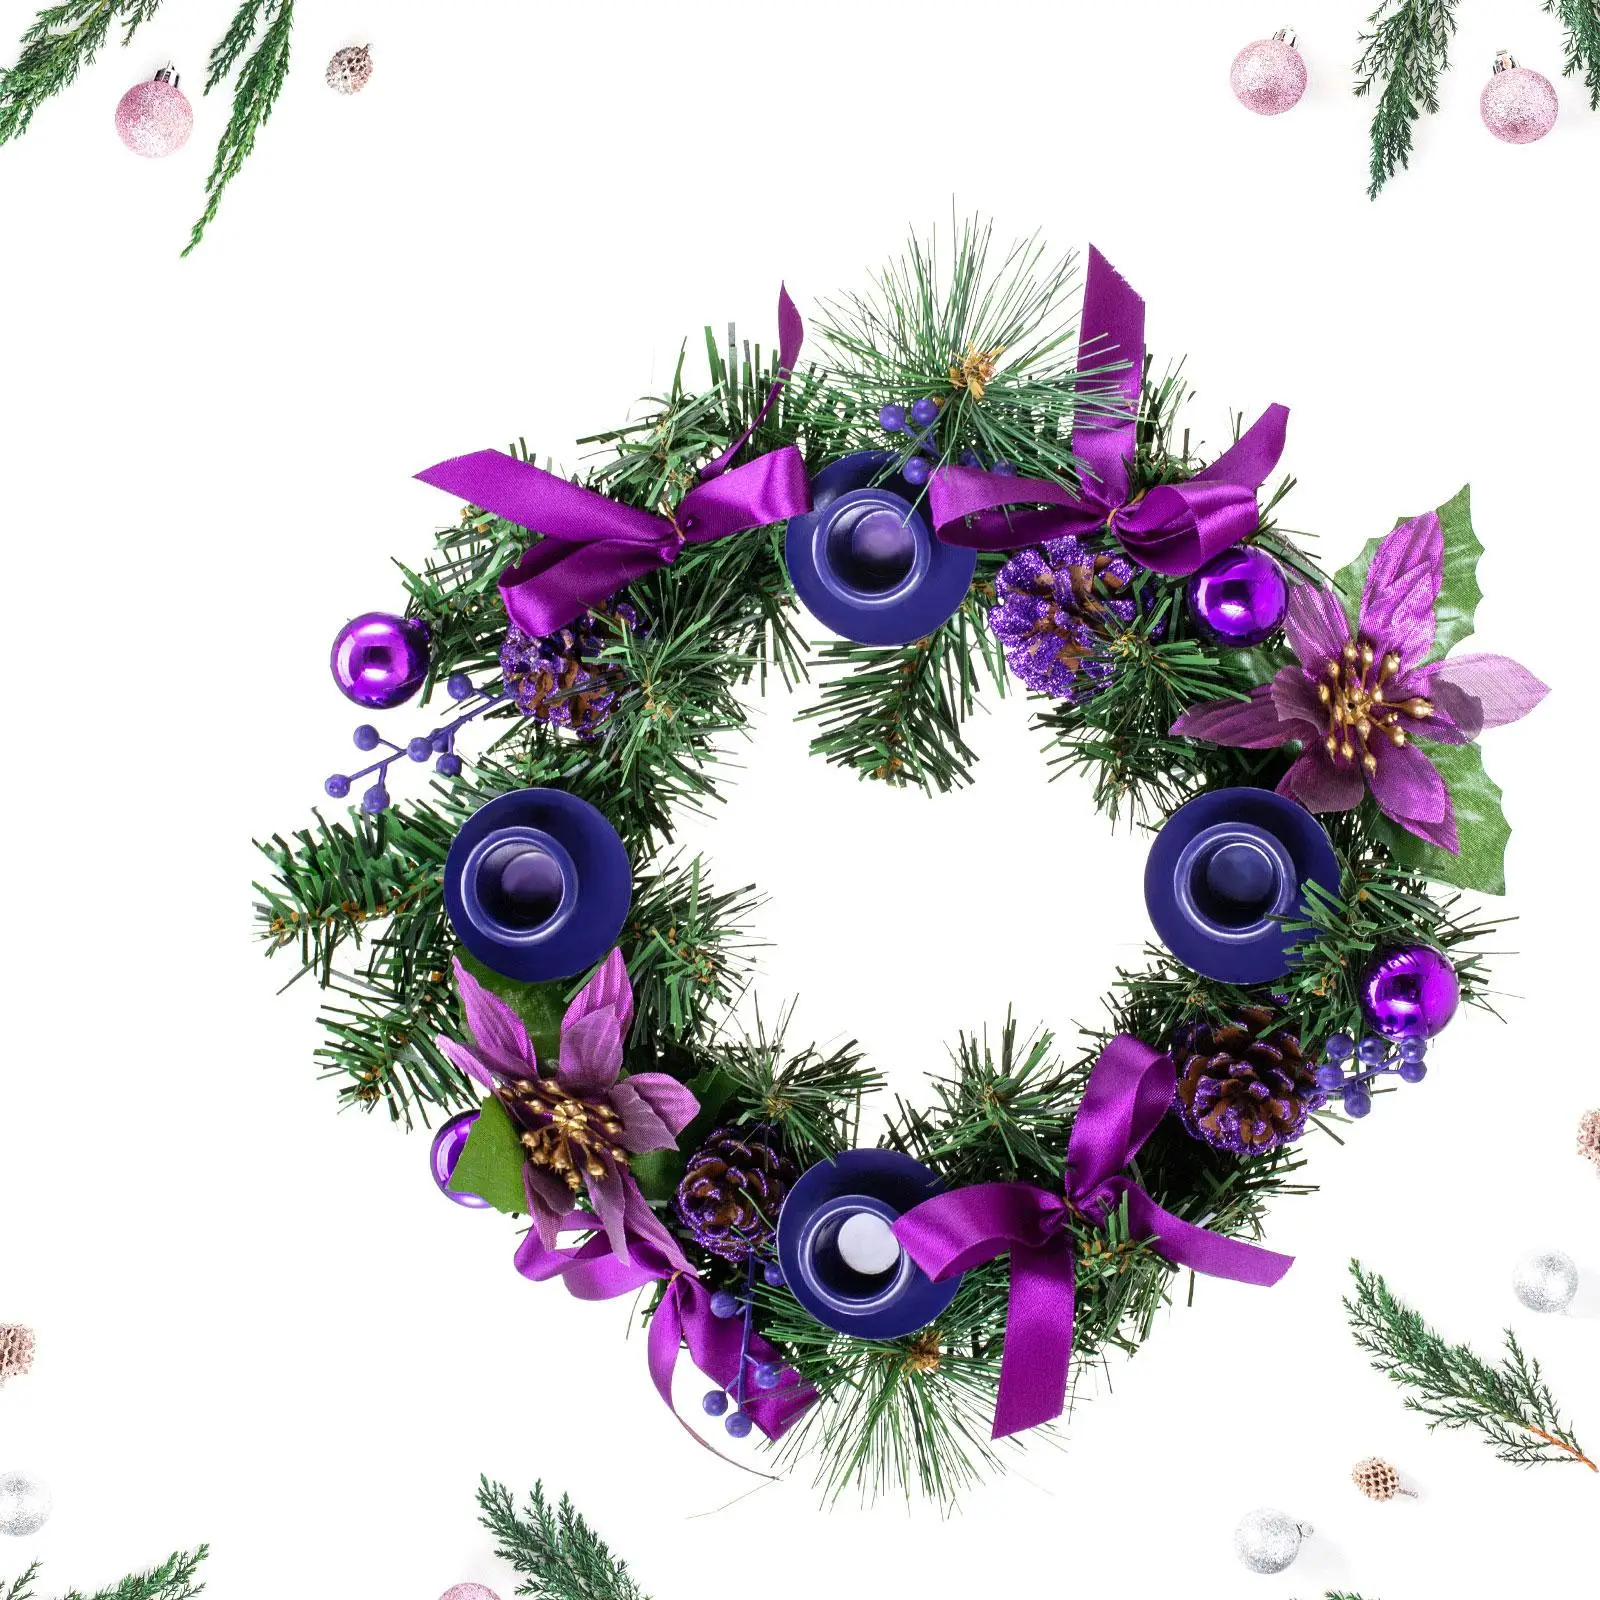 Modern Creative Garland Ornaments Decor Flower Wreath Gift Wall Hanging Centerpiece for Party Decor Indoor Event Wedding Table